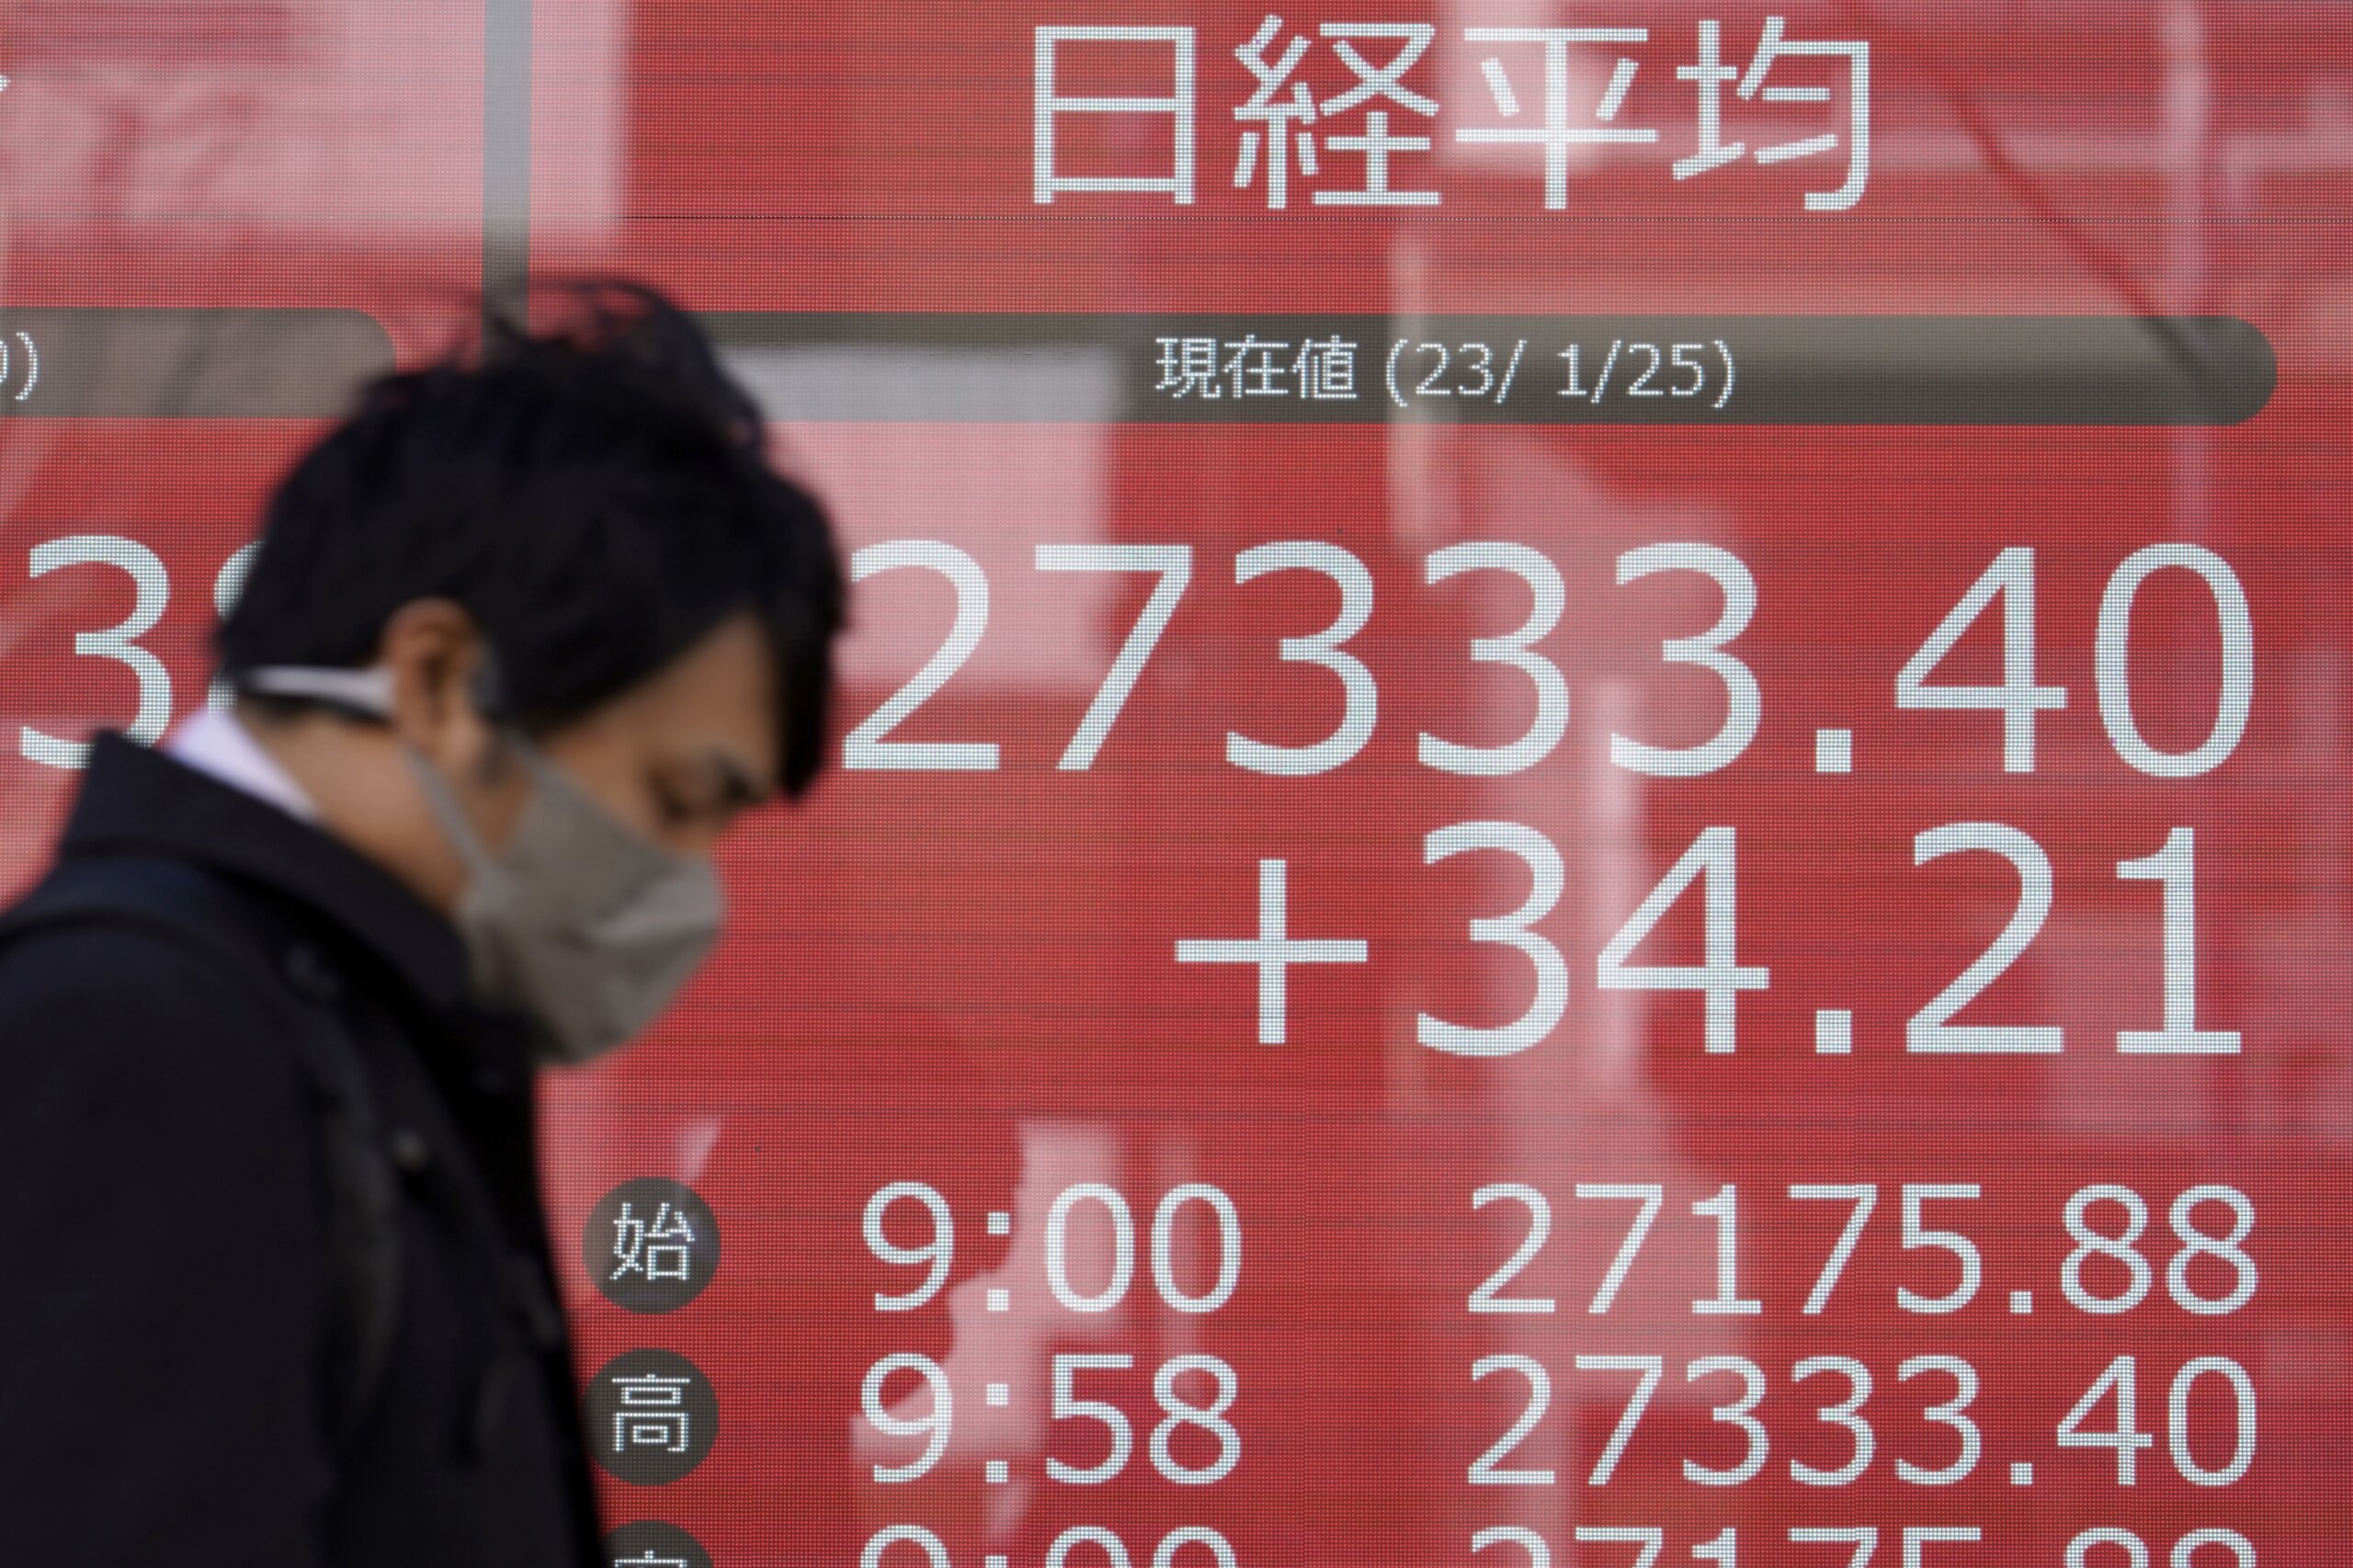 Stocks erase big losses driven by profit fears, end flat